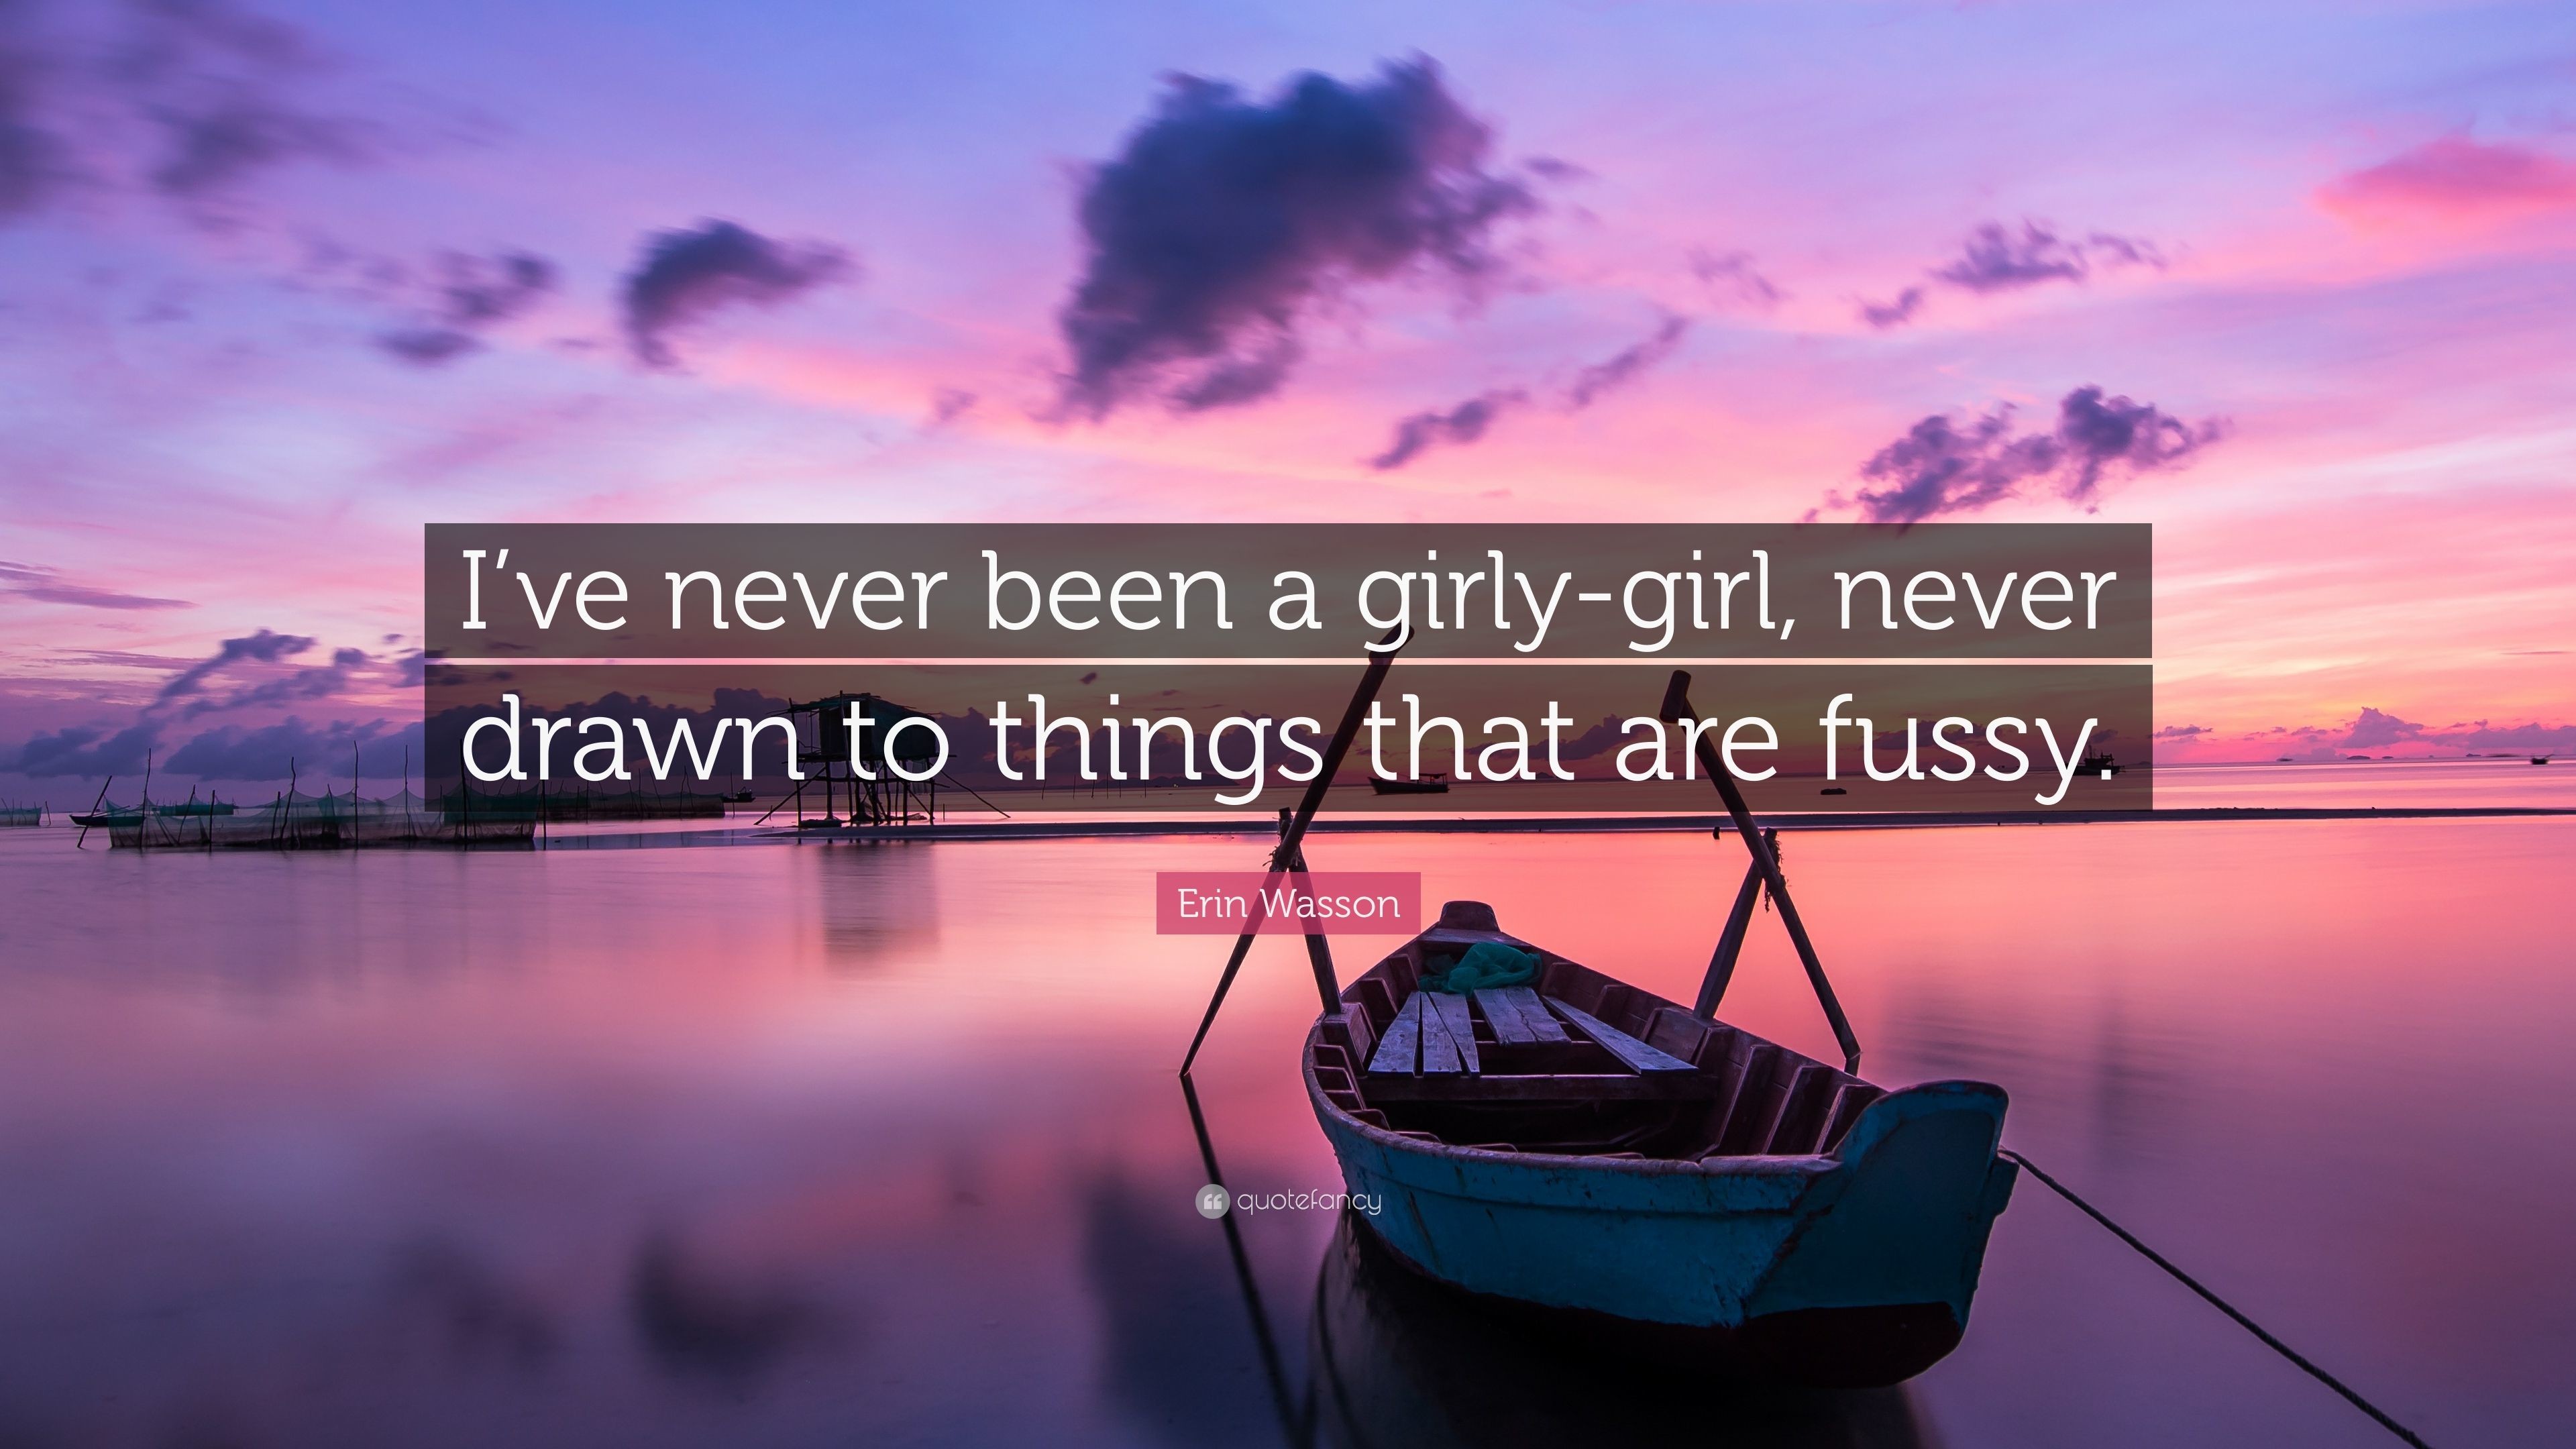 3840x2160 Erin Wasson Quote: “I've never been a girly-girl, never